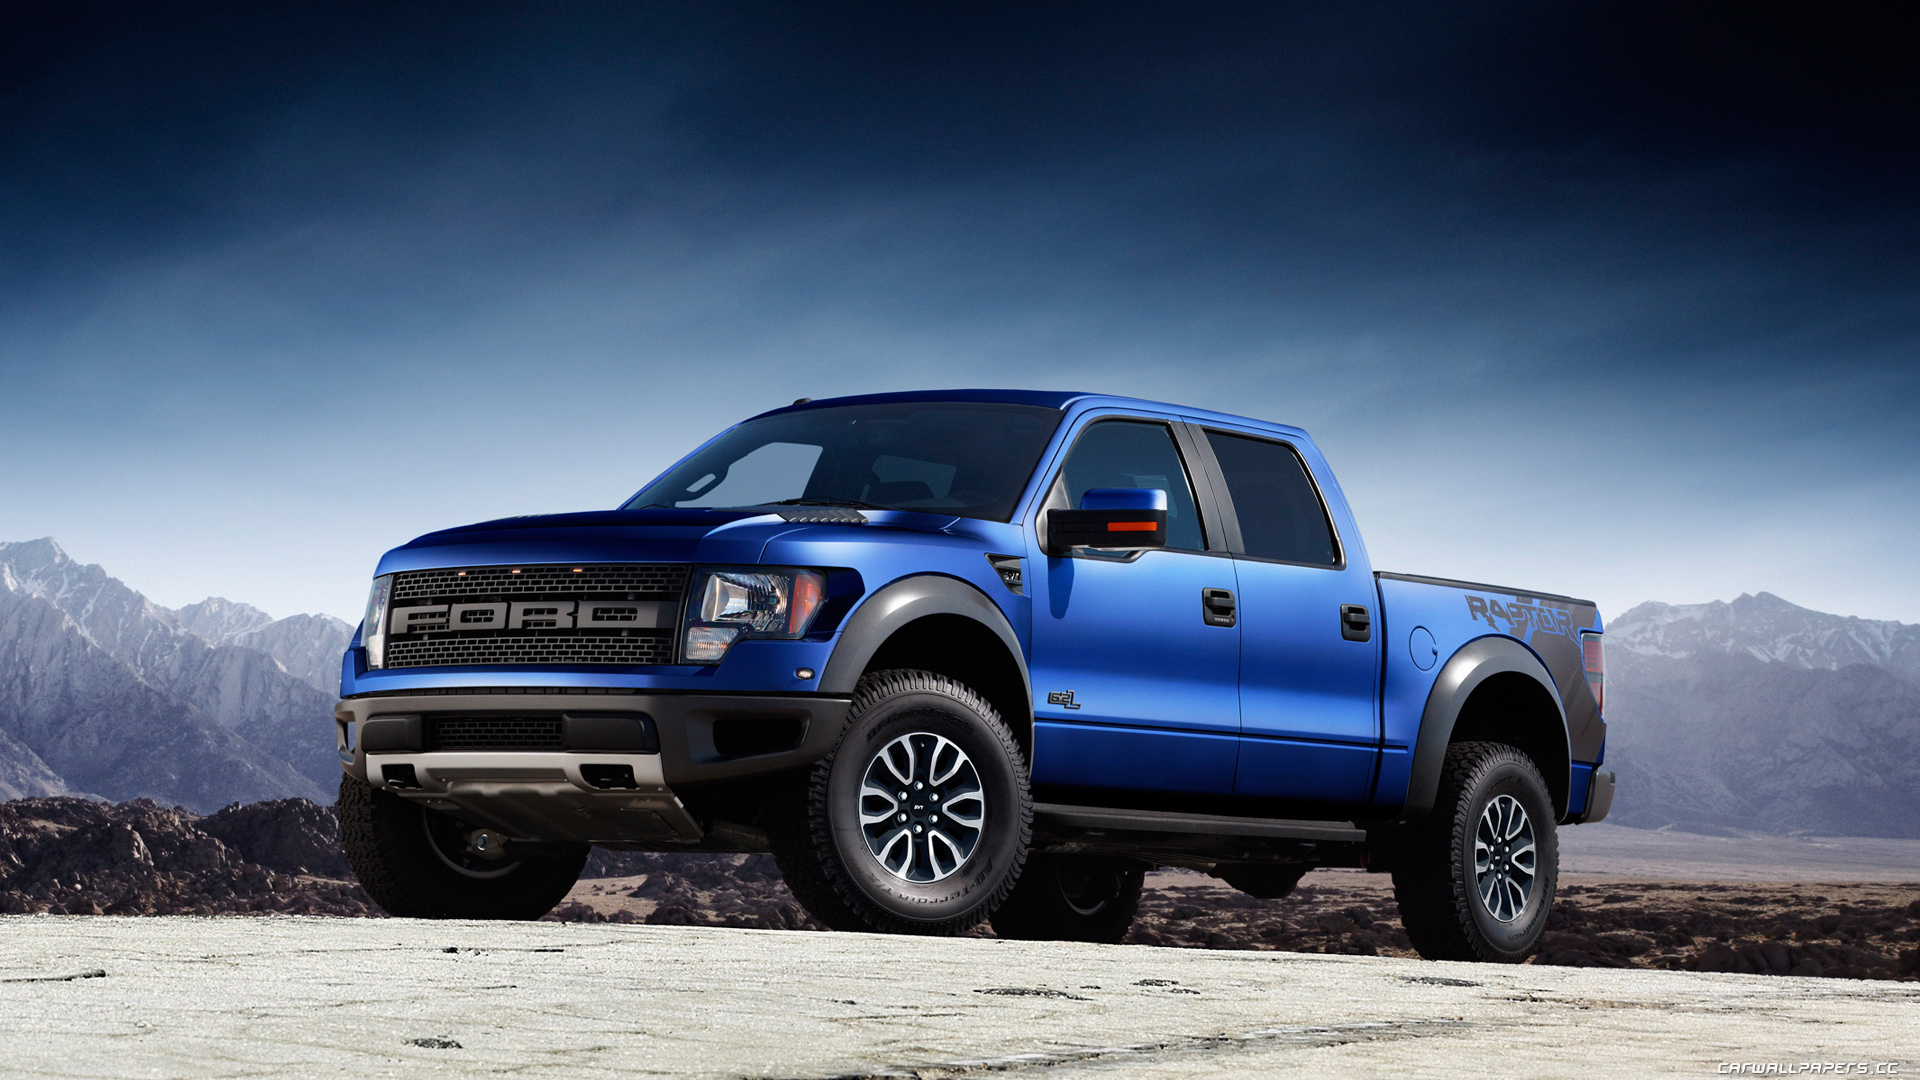 Ford Ford F150 Ford F150 Desktop Wallpapers Widescreen - Ford F 150 Svt Raptor 2012 - HD Wallpaper 